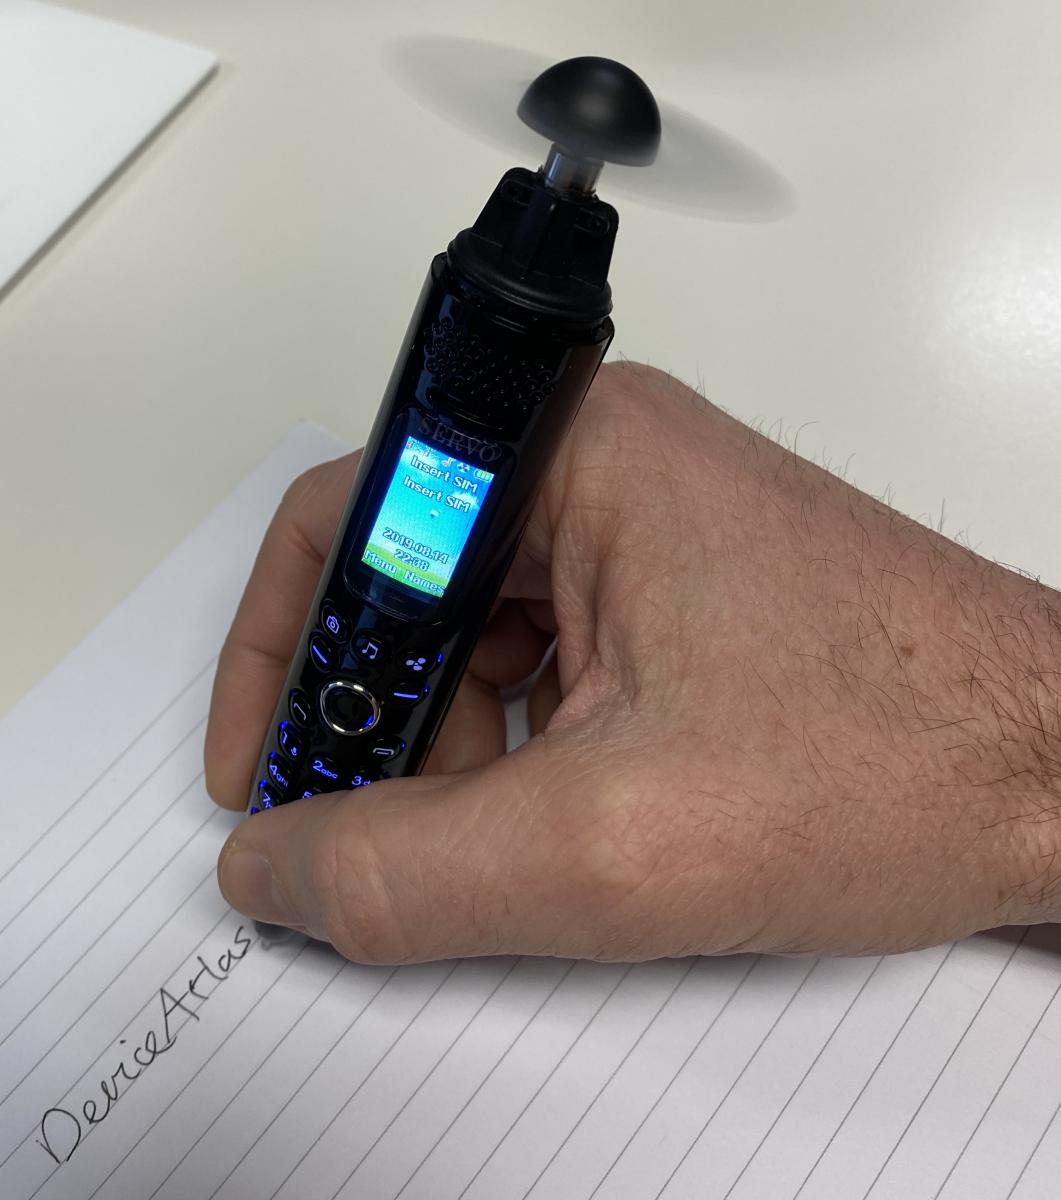 a dual SIM phone that is also a pen and a fan